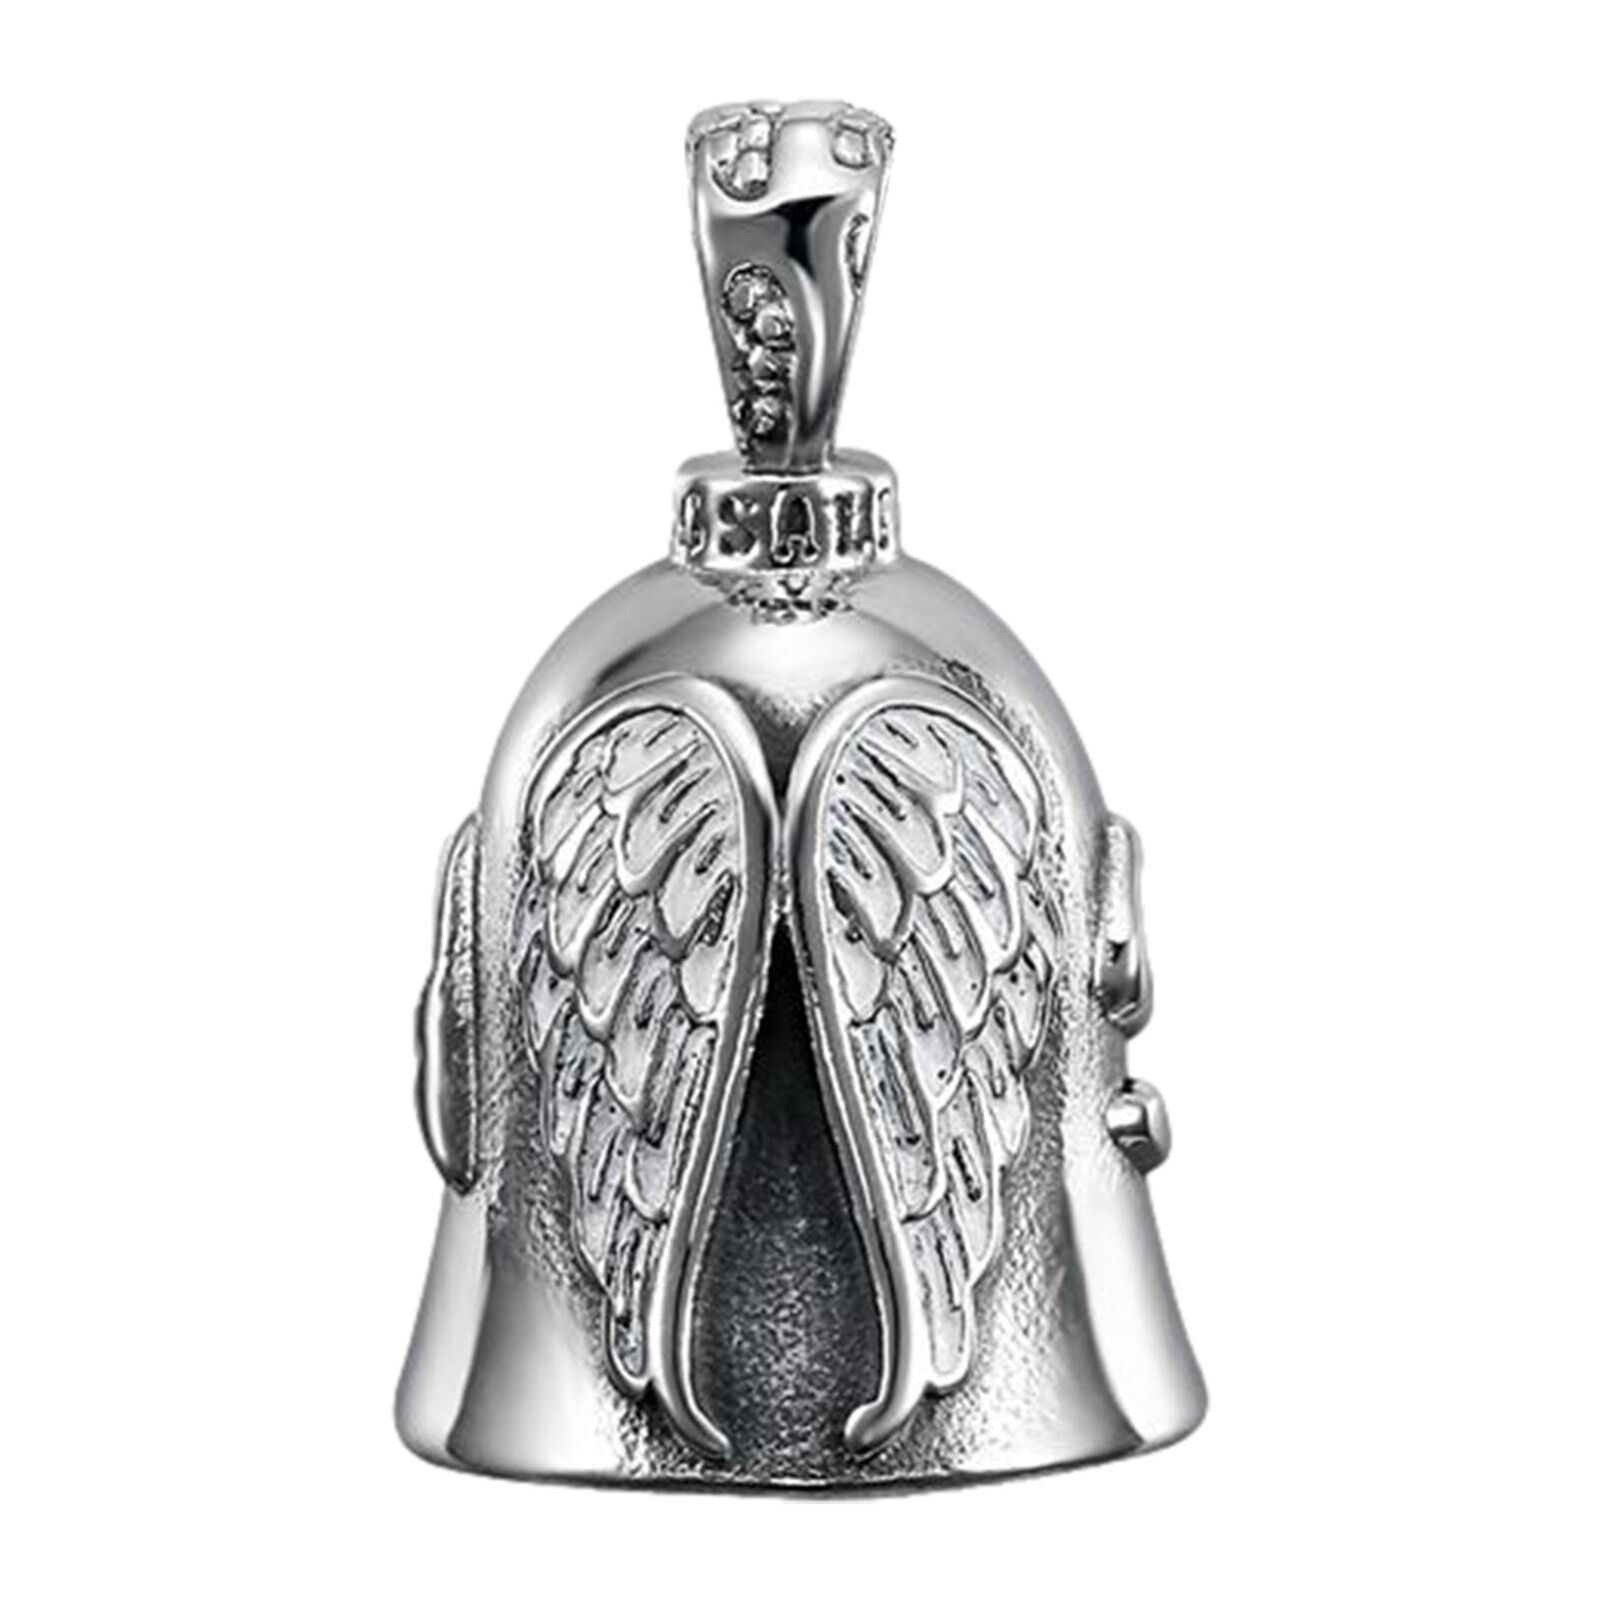 White Winged Motorcycle Bell Angel Guardian Biker Riding Bell Angel Guardian Bel